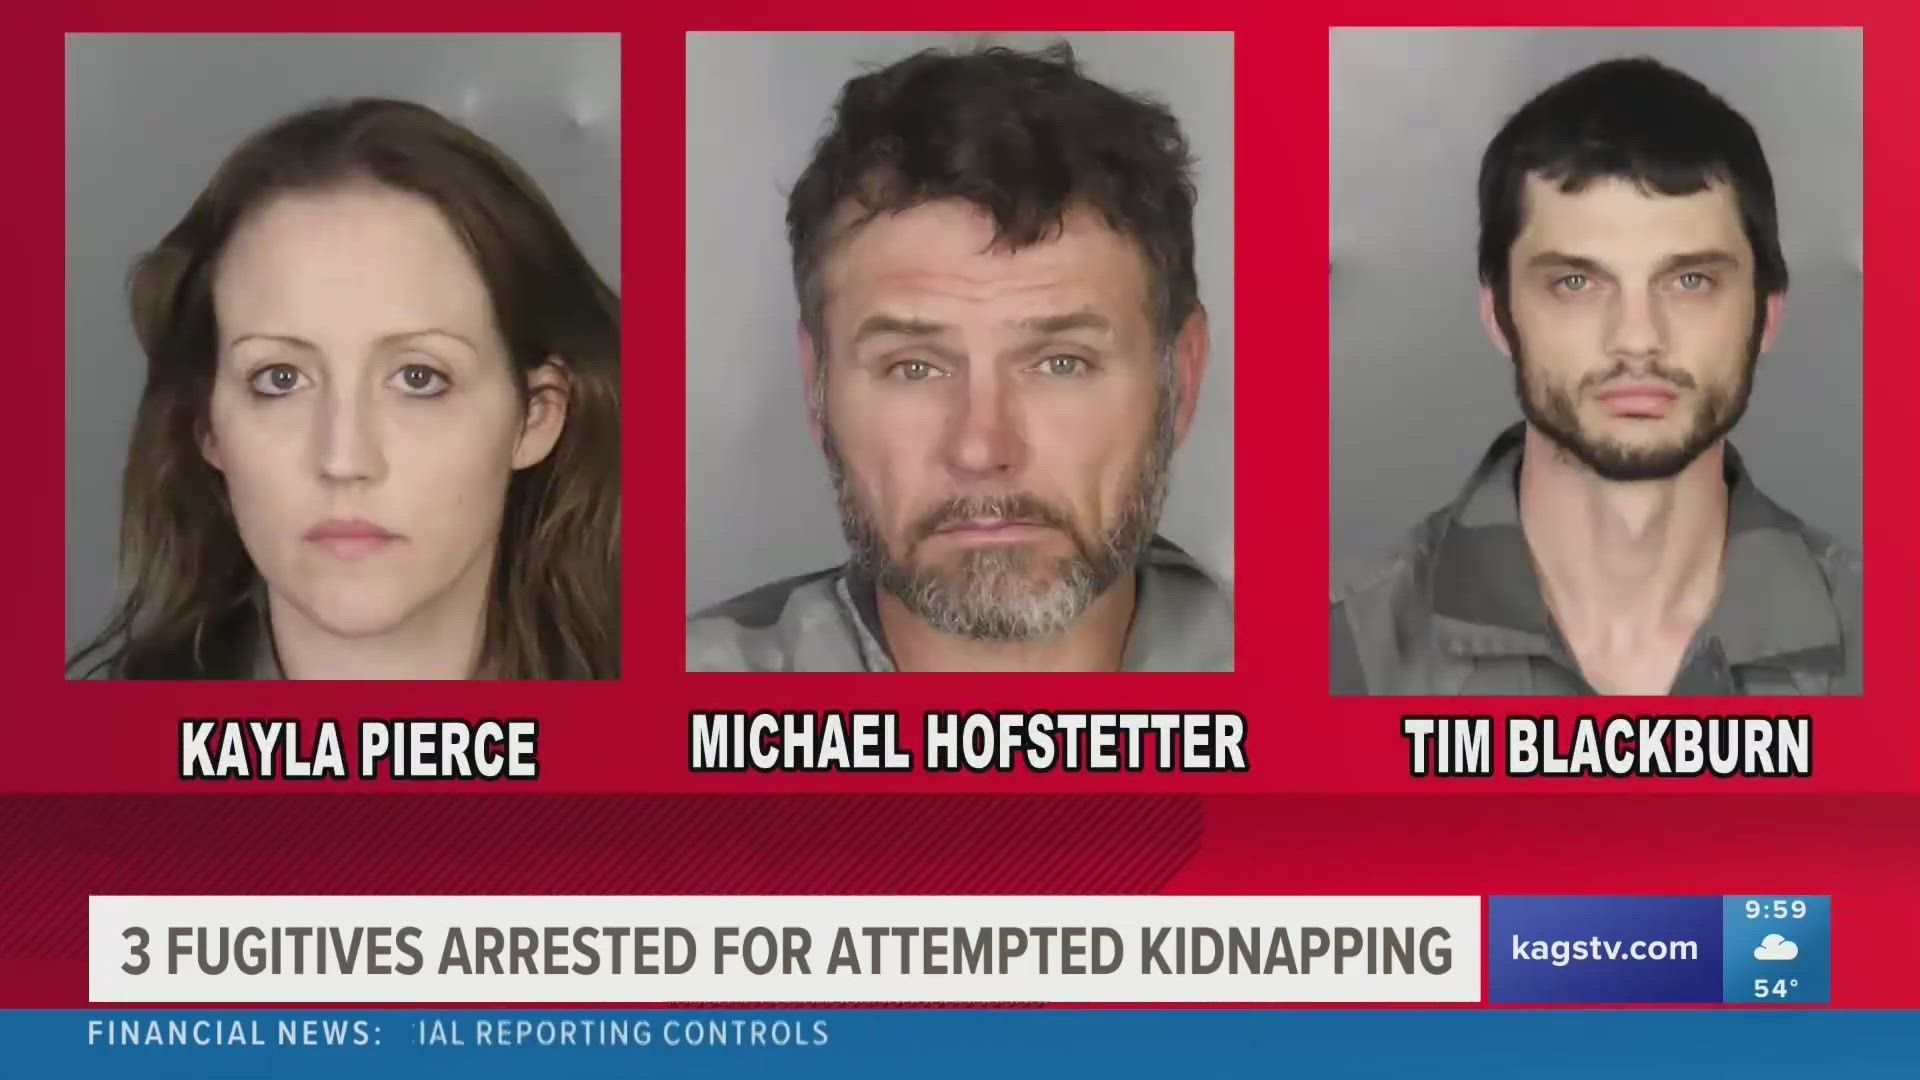 Michael Hofstetter, Kayla Pierce, and Tim Blackburn have all been arrested in connection with an attempted kidnapping that took place on Sunday, March 12.